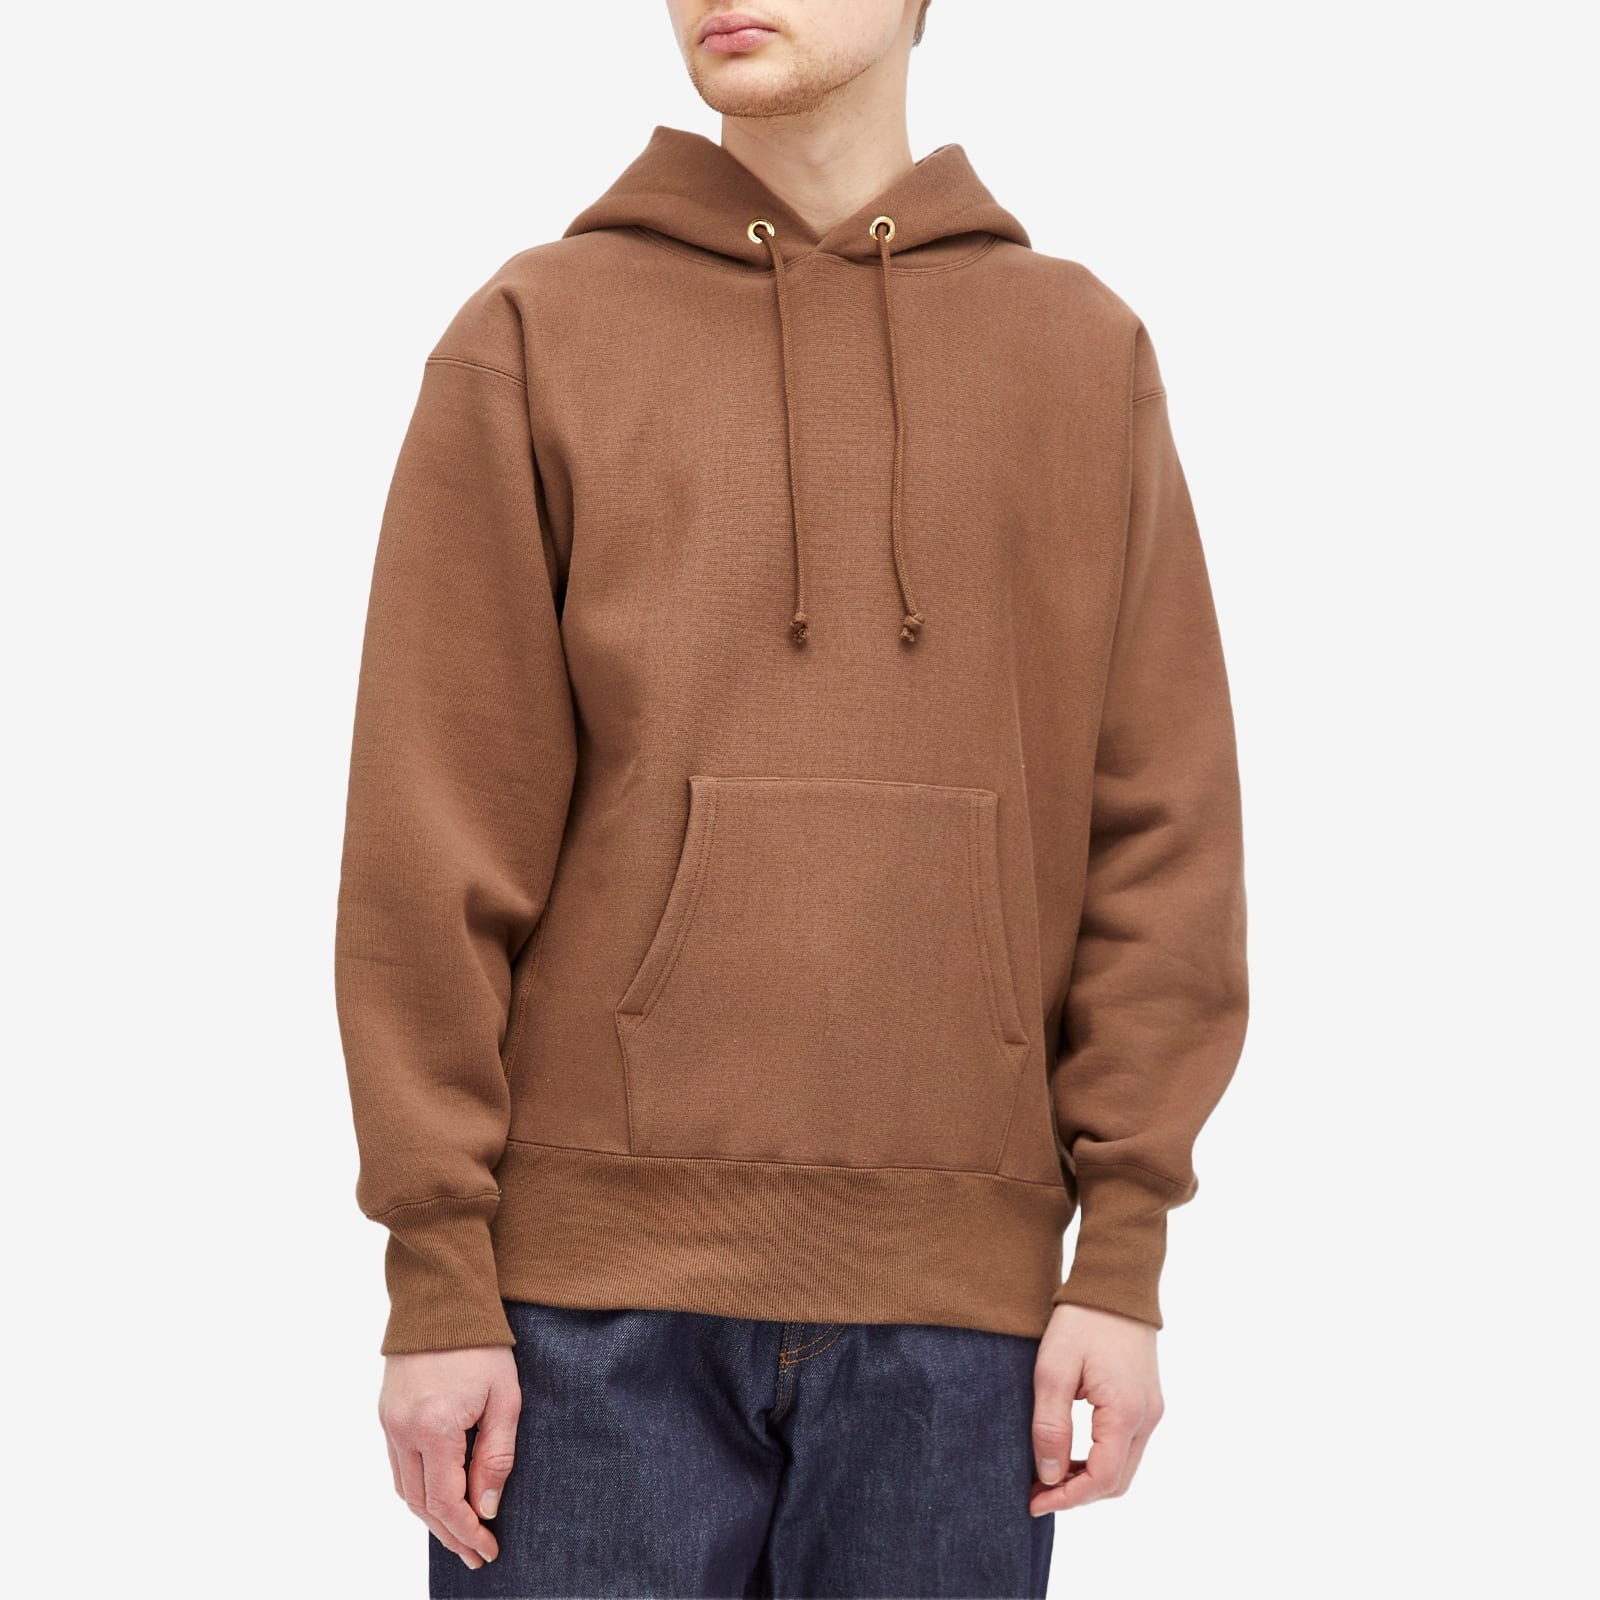 Champion Made in Japan Hoodie - 2